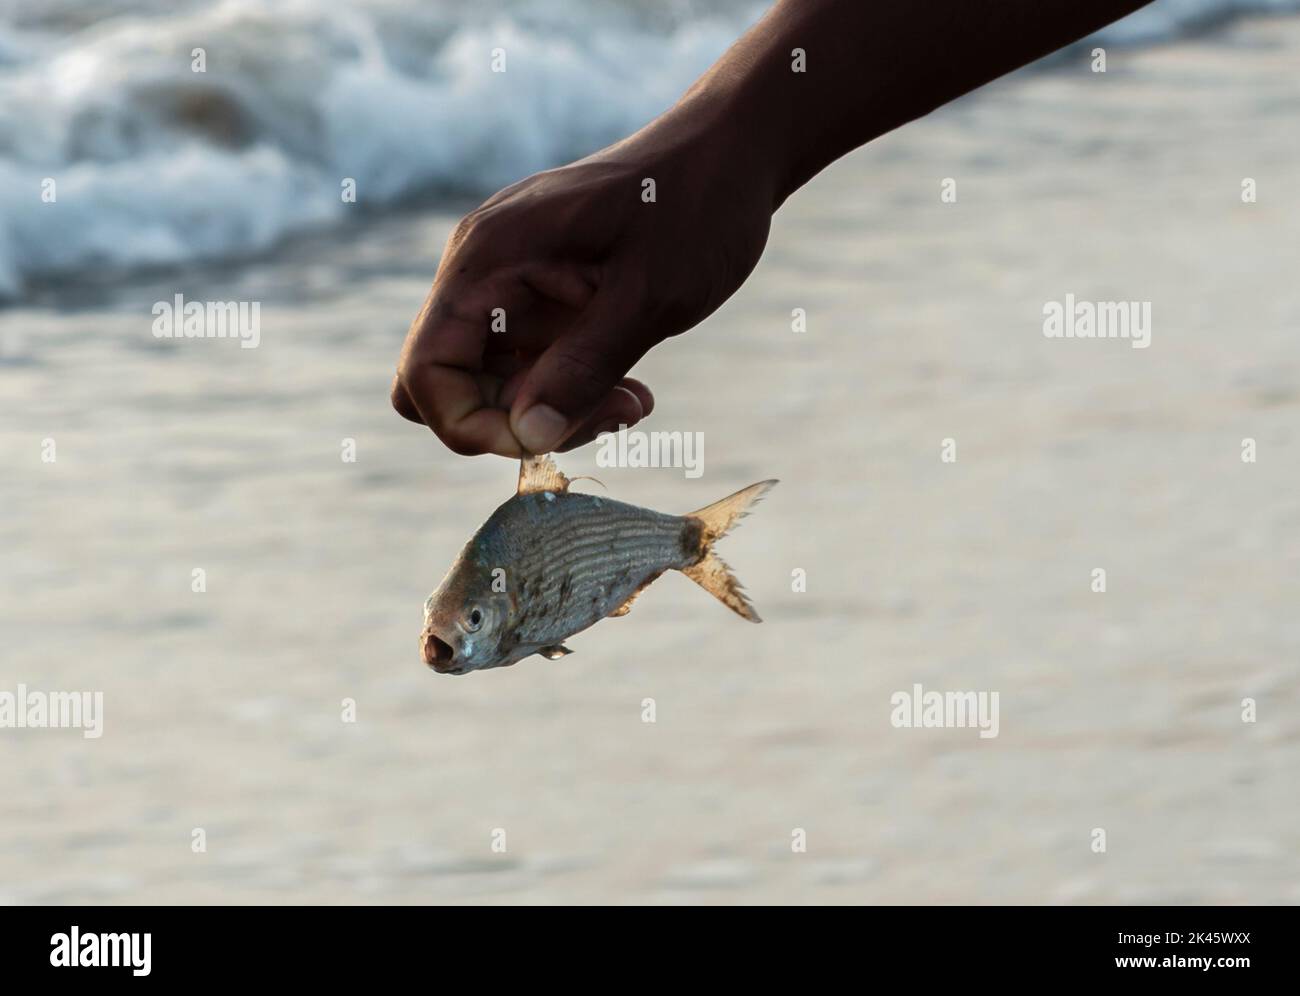 Fishermen carrying a dead fish from the sea Stock Photo